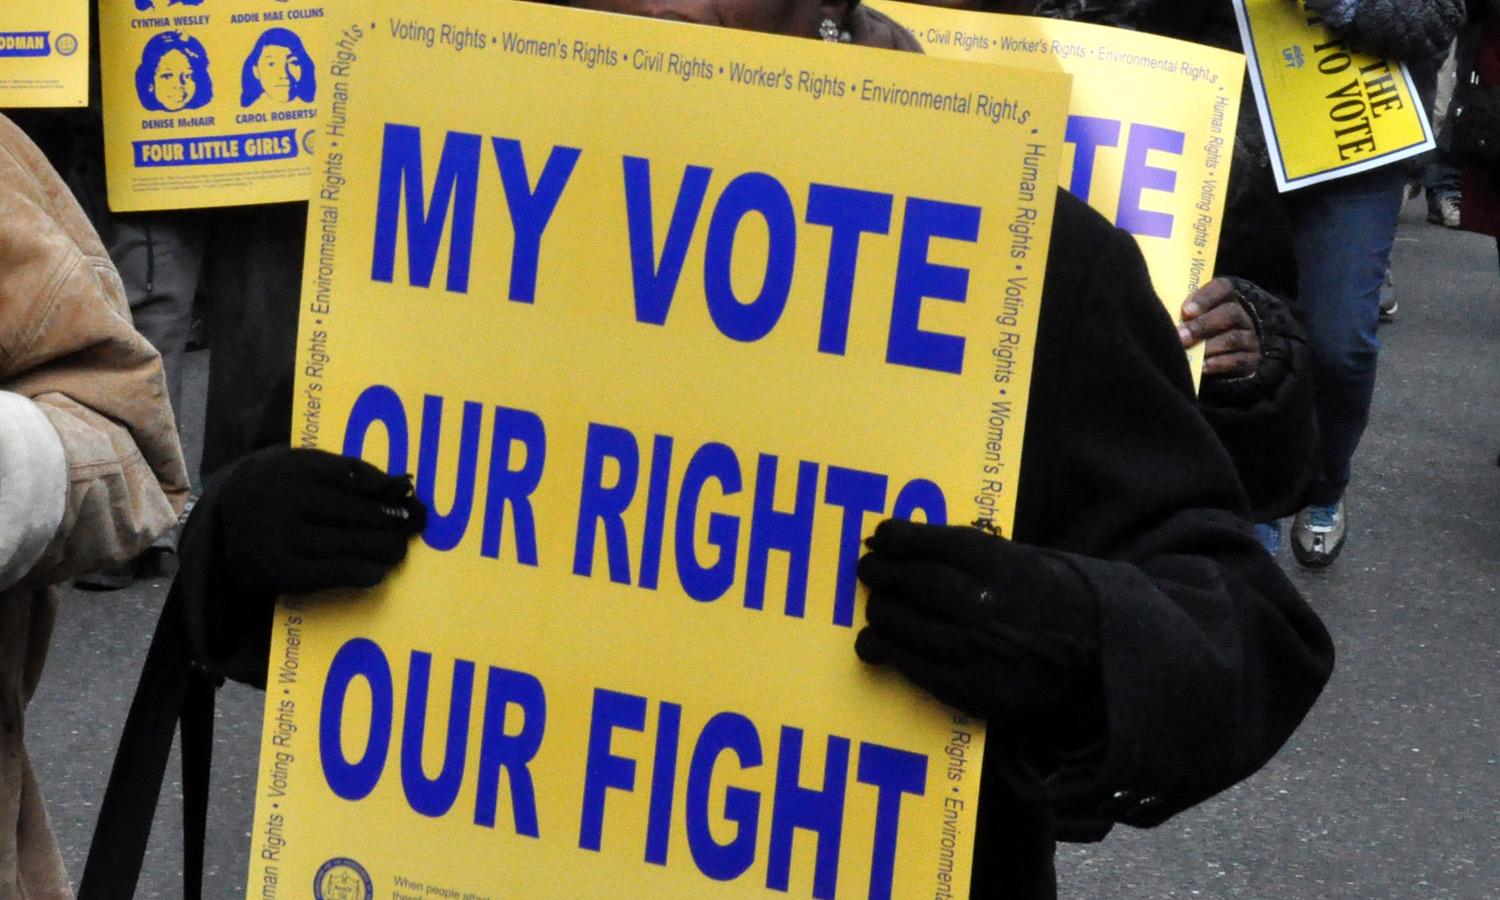 We Must Fight Restrictions on Voting Rights - Union of Concerned